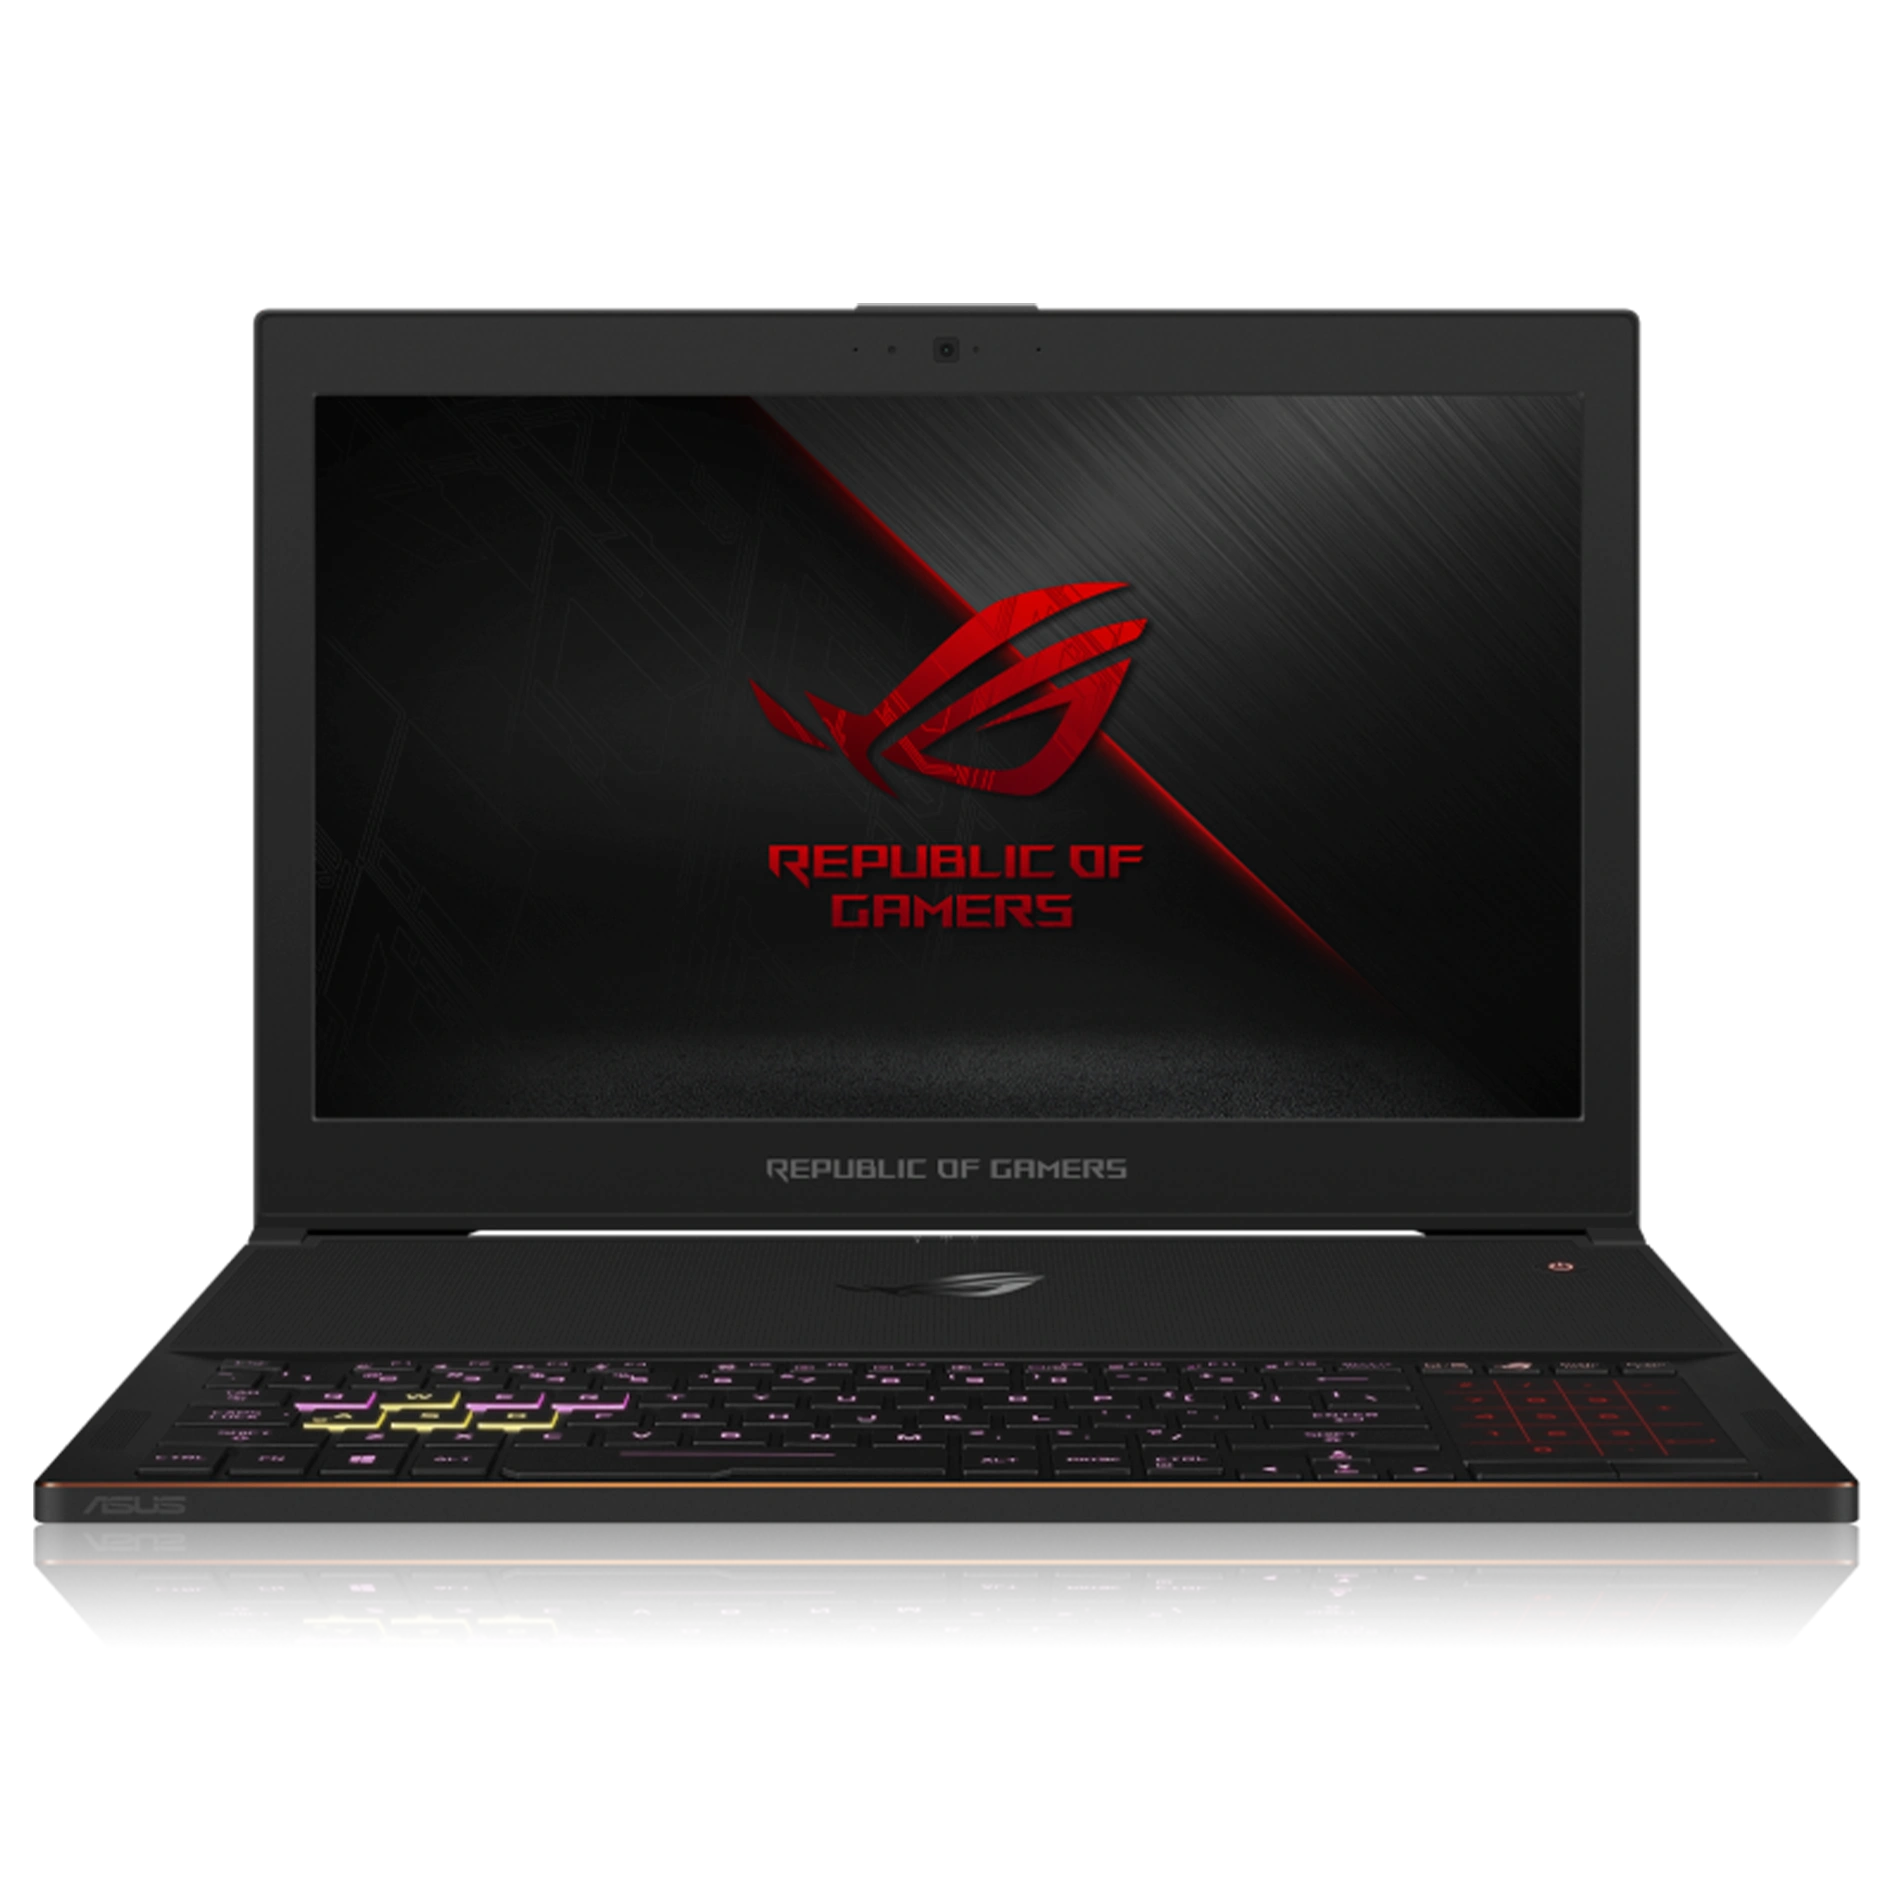 ASUS ROG Zephyrus VR Ready Laptop with republic of gamers logo on the screen